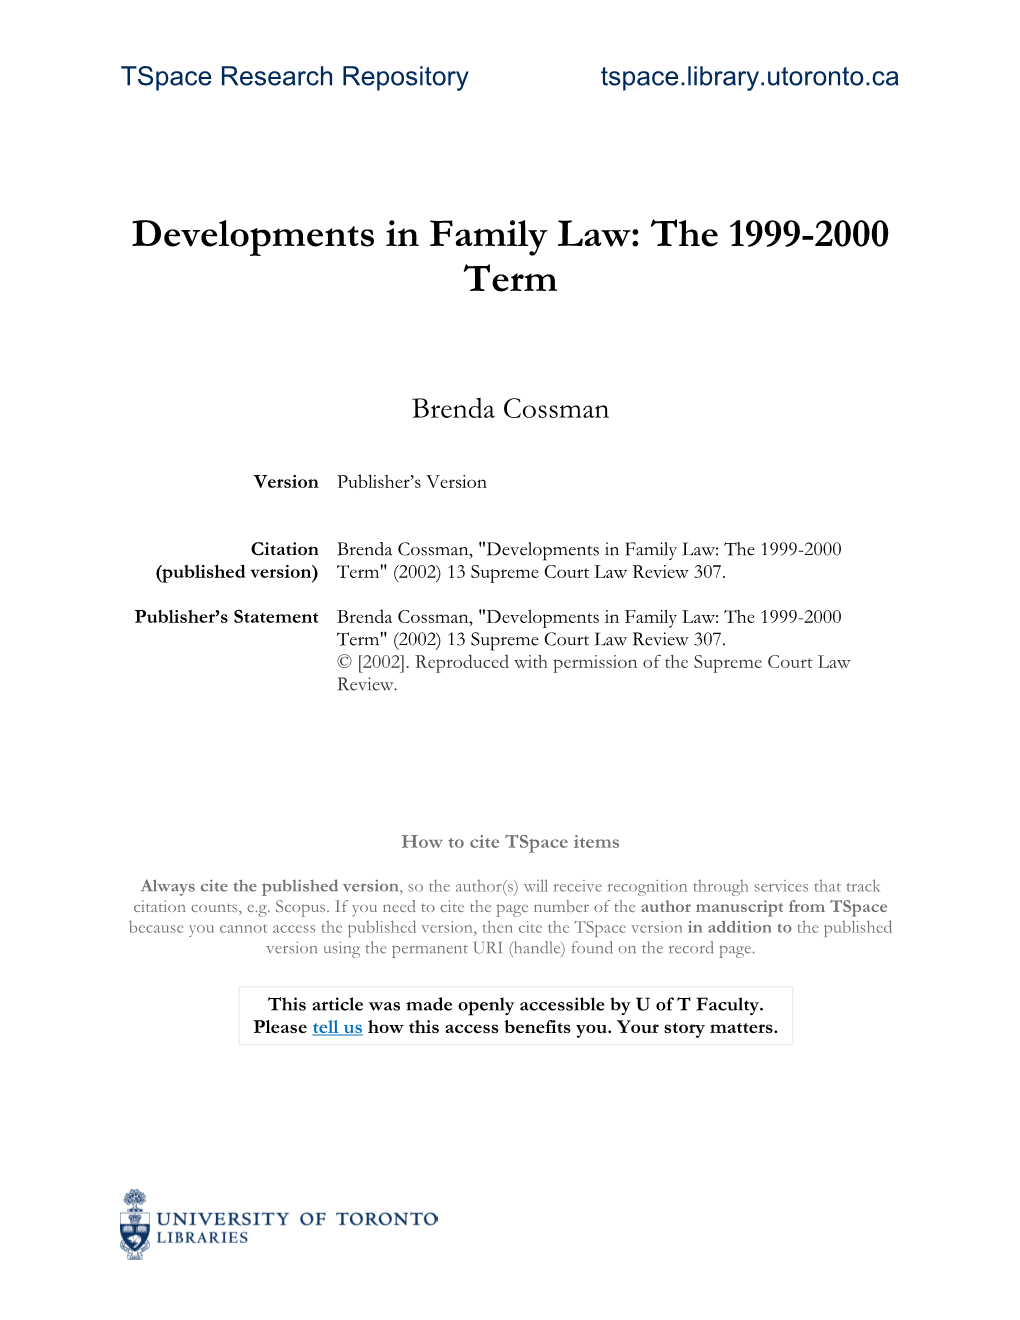 Developments in Family Law: the 1999-2000 Term